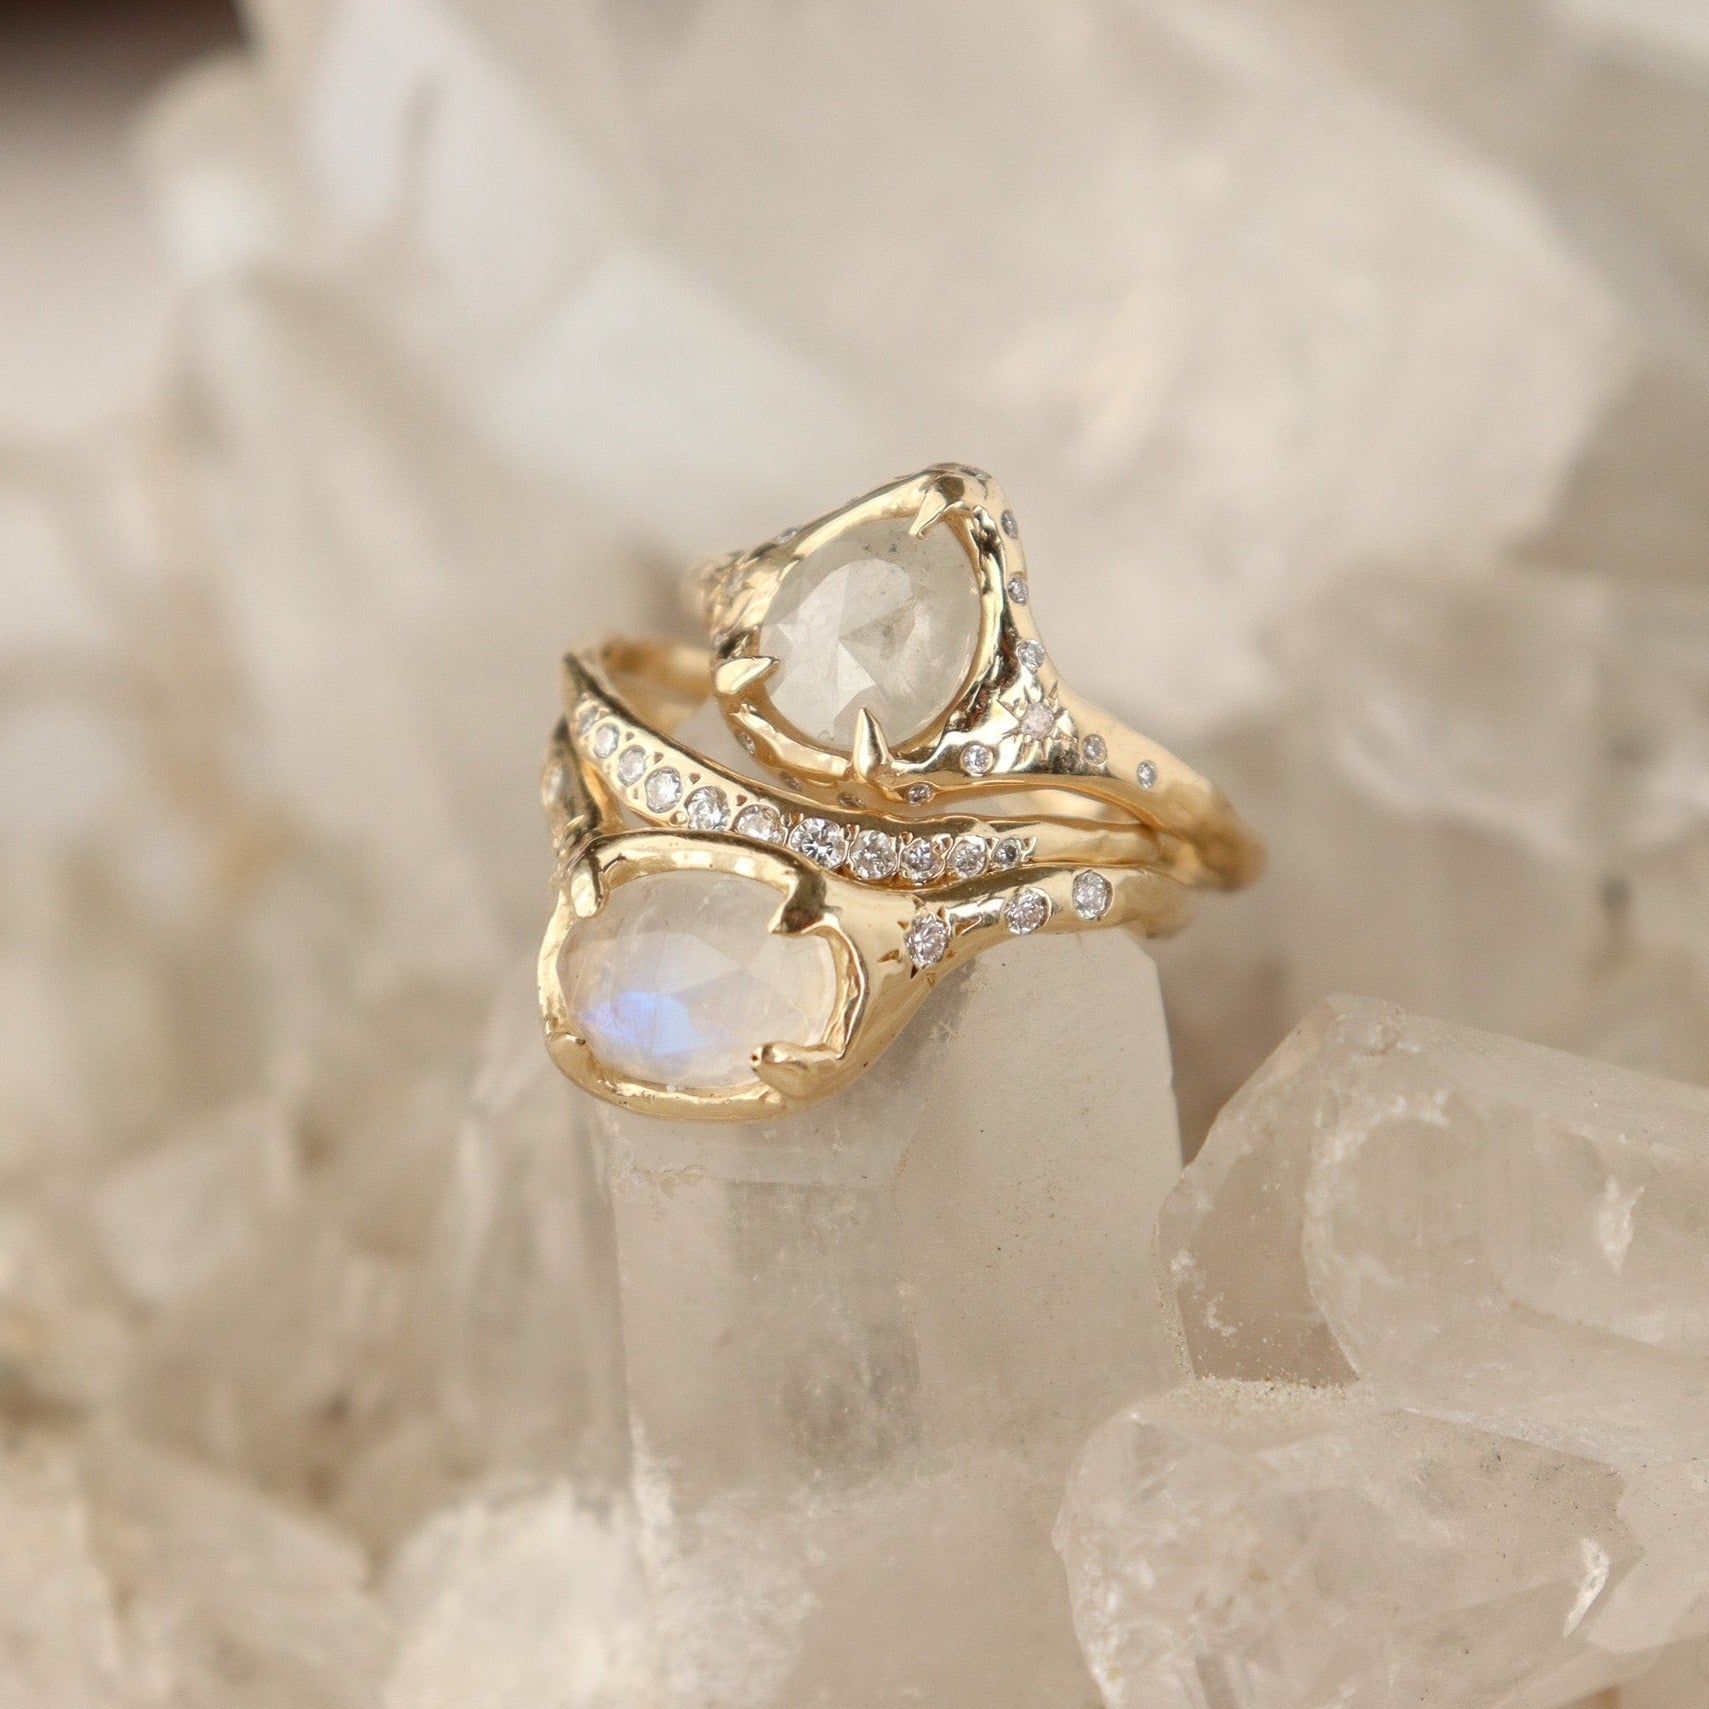 The Realm | Moonstone and Star Set Diamond Ring, 14k Gold